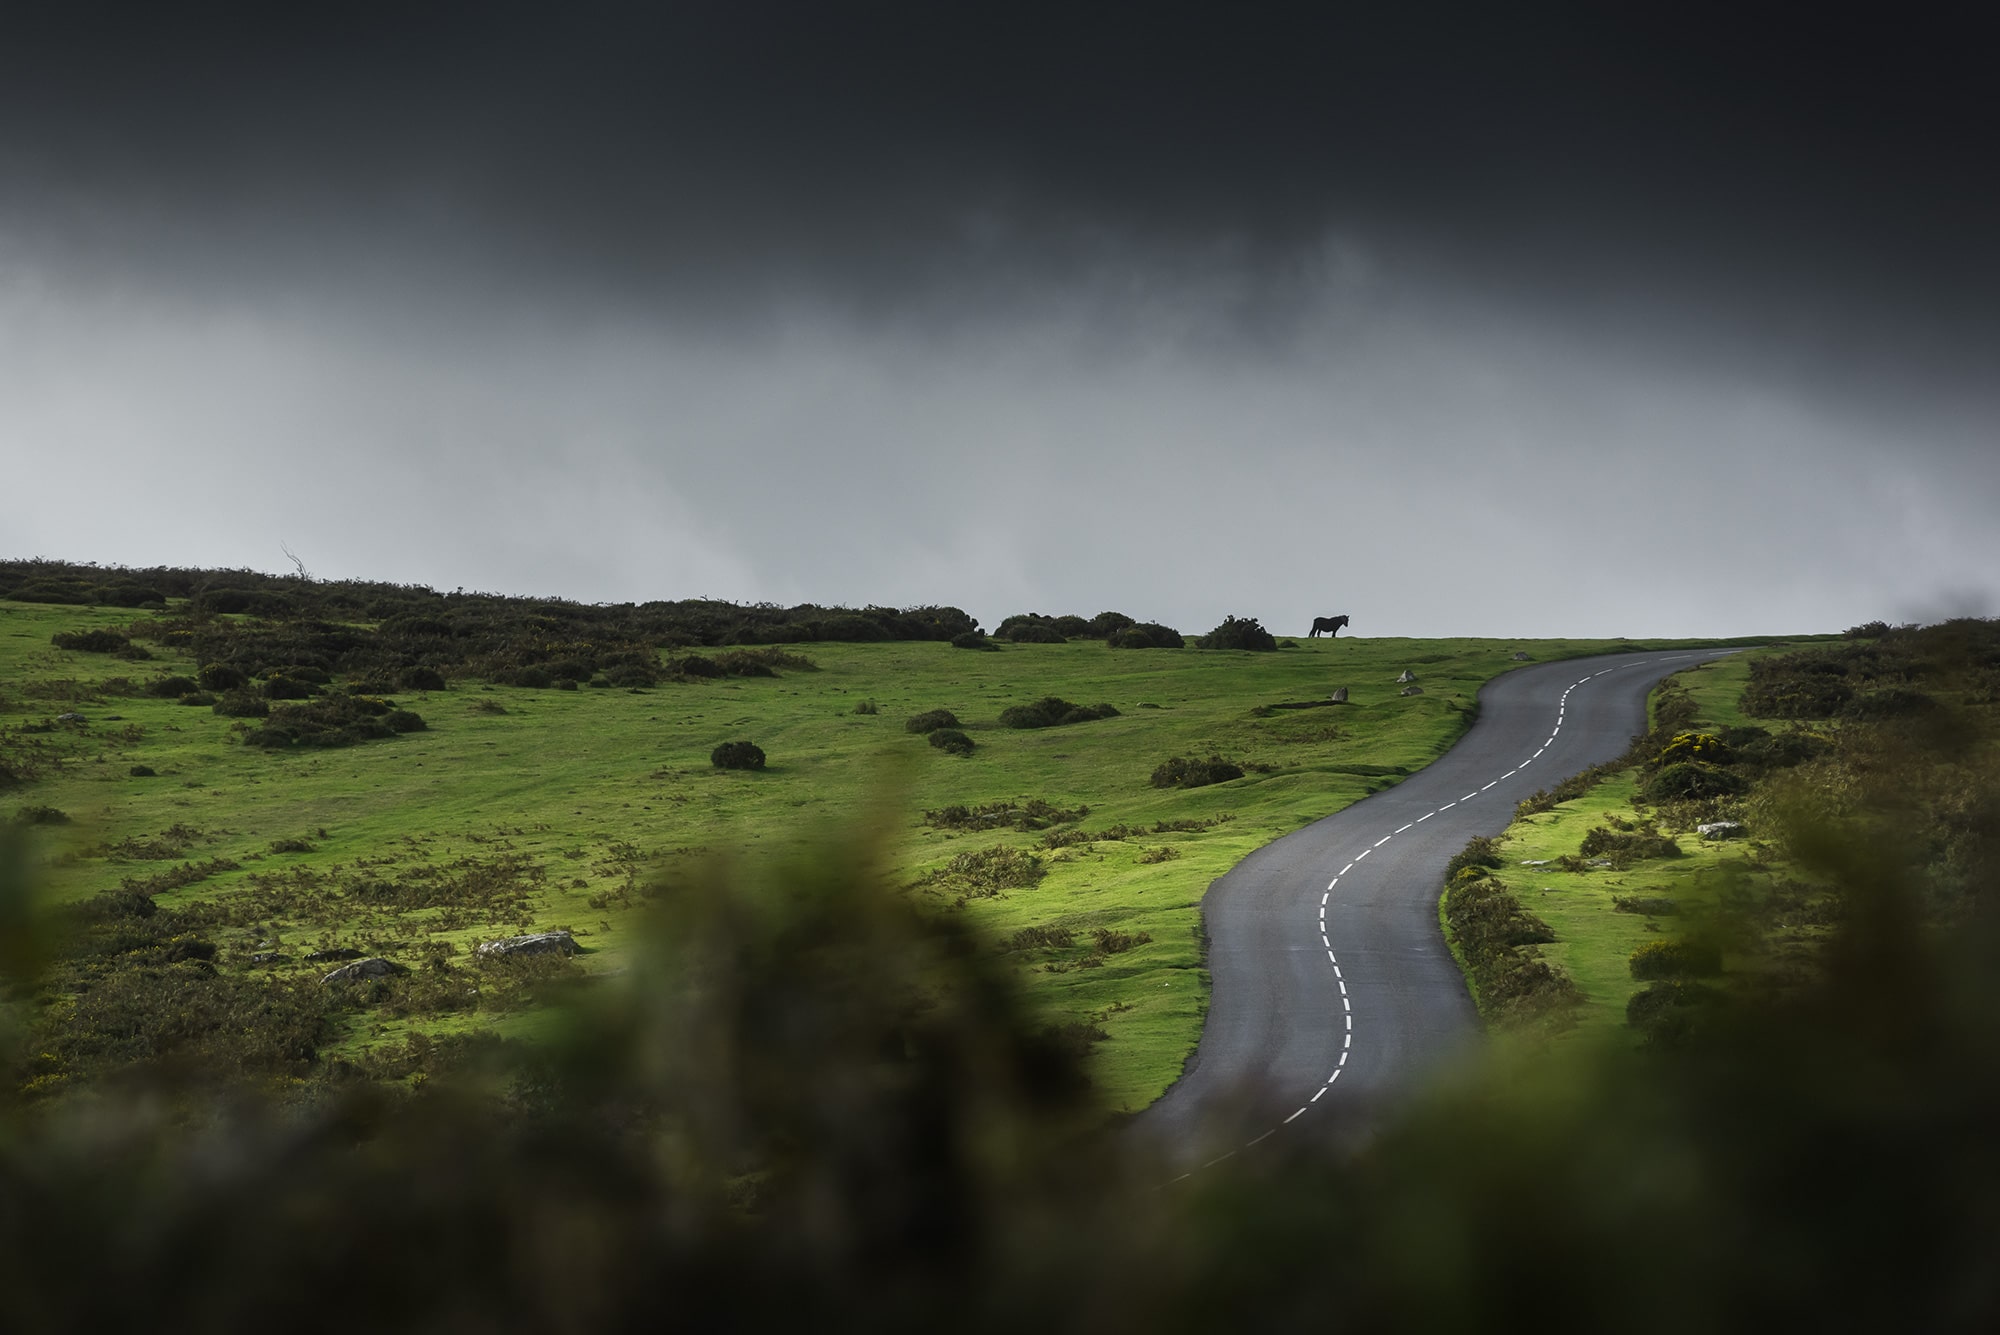 Immerse yourself in the rugged beauty of Dartmoor National Park in Devon, Southern England, with this epic landscape photography captured by Swiss photographer Jennifer Esseiva and her Nikon D810. Behold the iconic Dartmoor pony, grazing near the road amidst the breathtaking scenery of the moors. Against a backdrop of dramatic skies, Esseiva skillfully captures the timeless charm and wild allure of this unique landscape. Join Esseiva on this visual journey through Dartmoor, where every frame tells a story of untamed beauty and the symbiotic relationship between nature and the indigenous ponies.